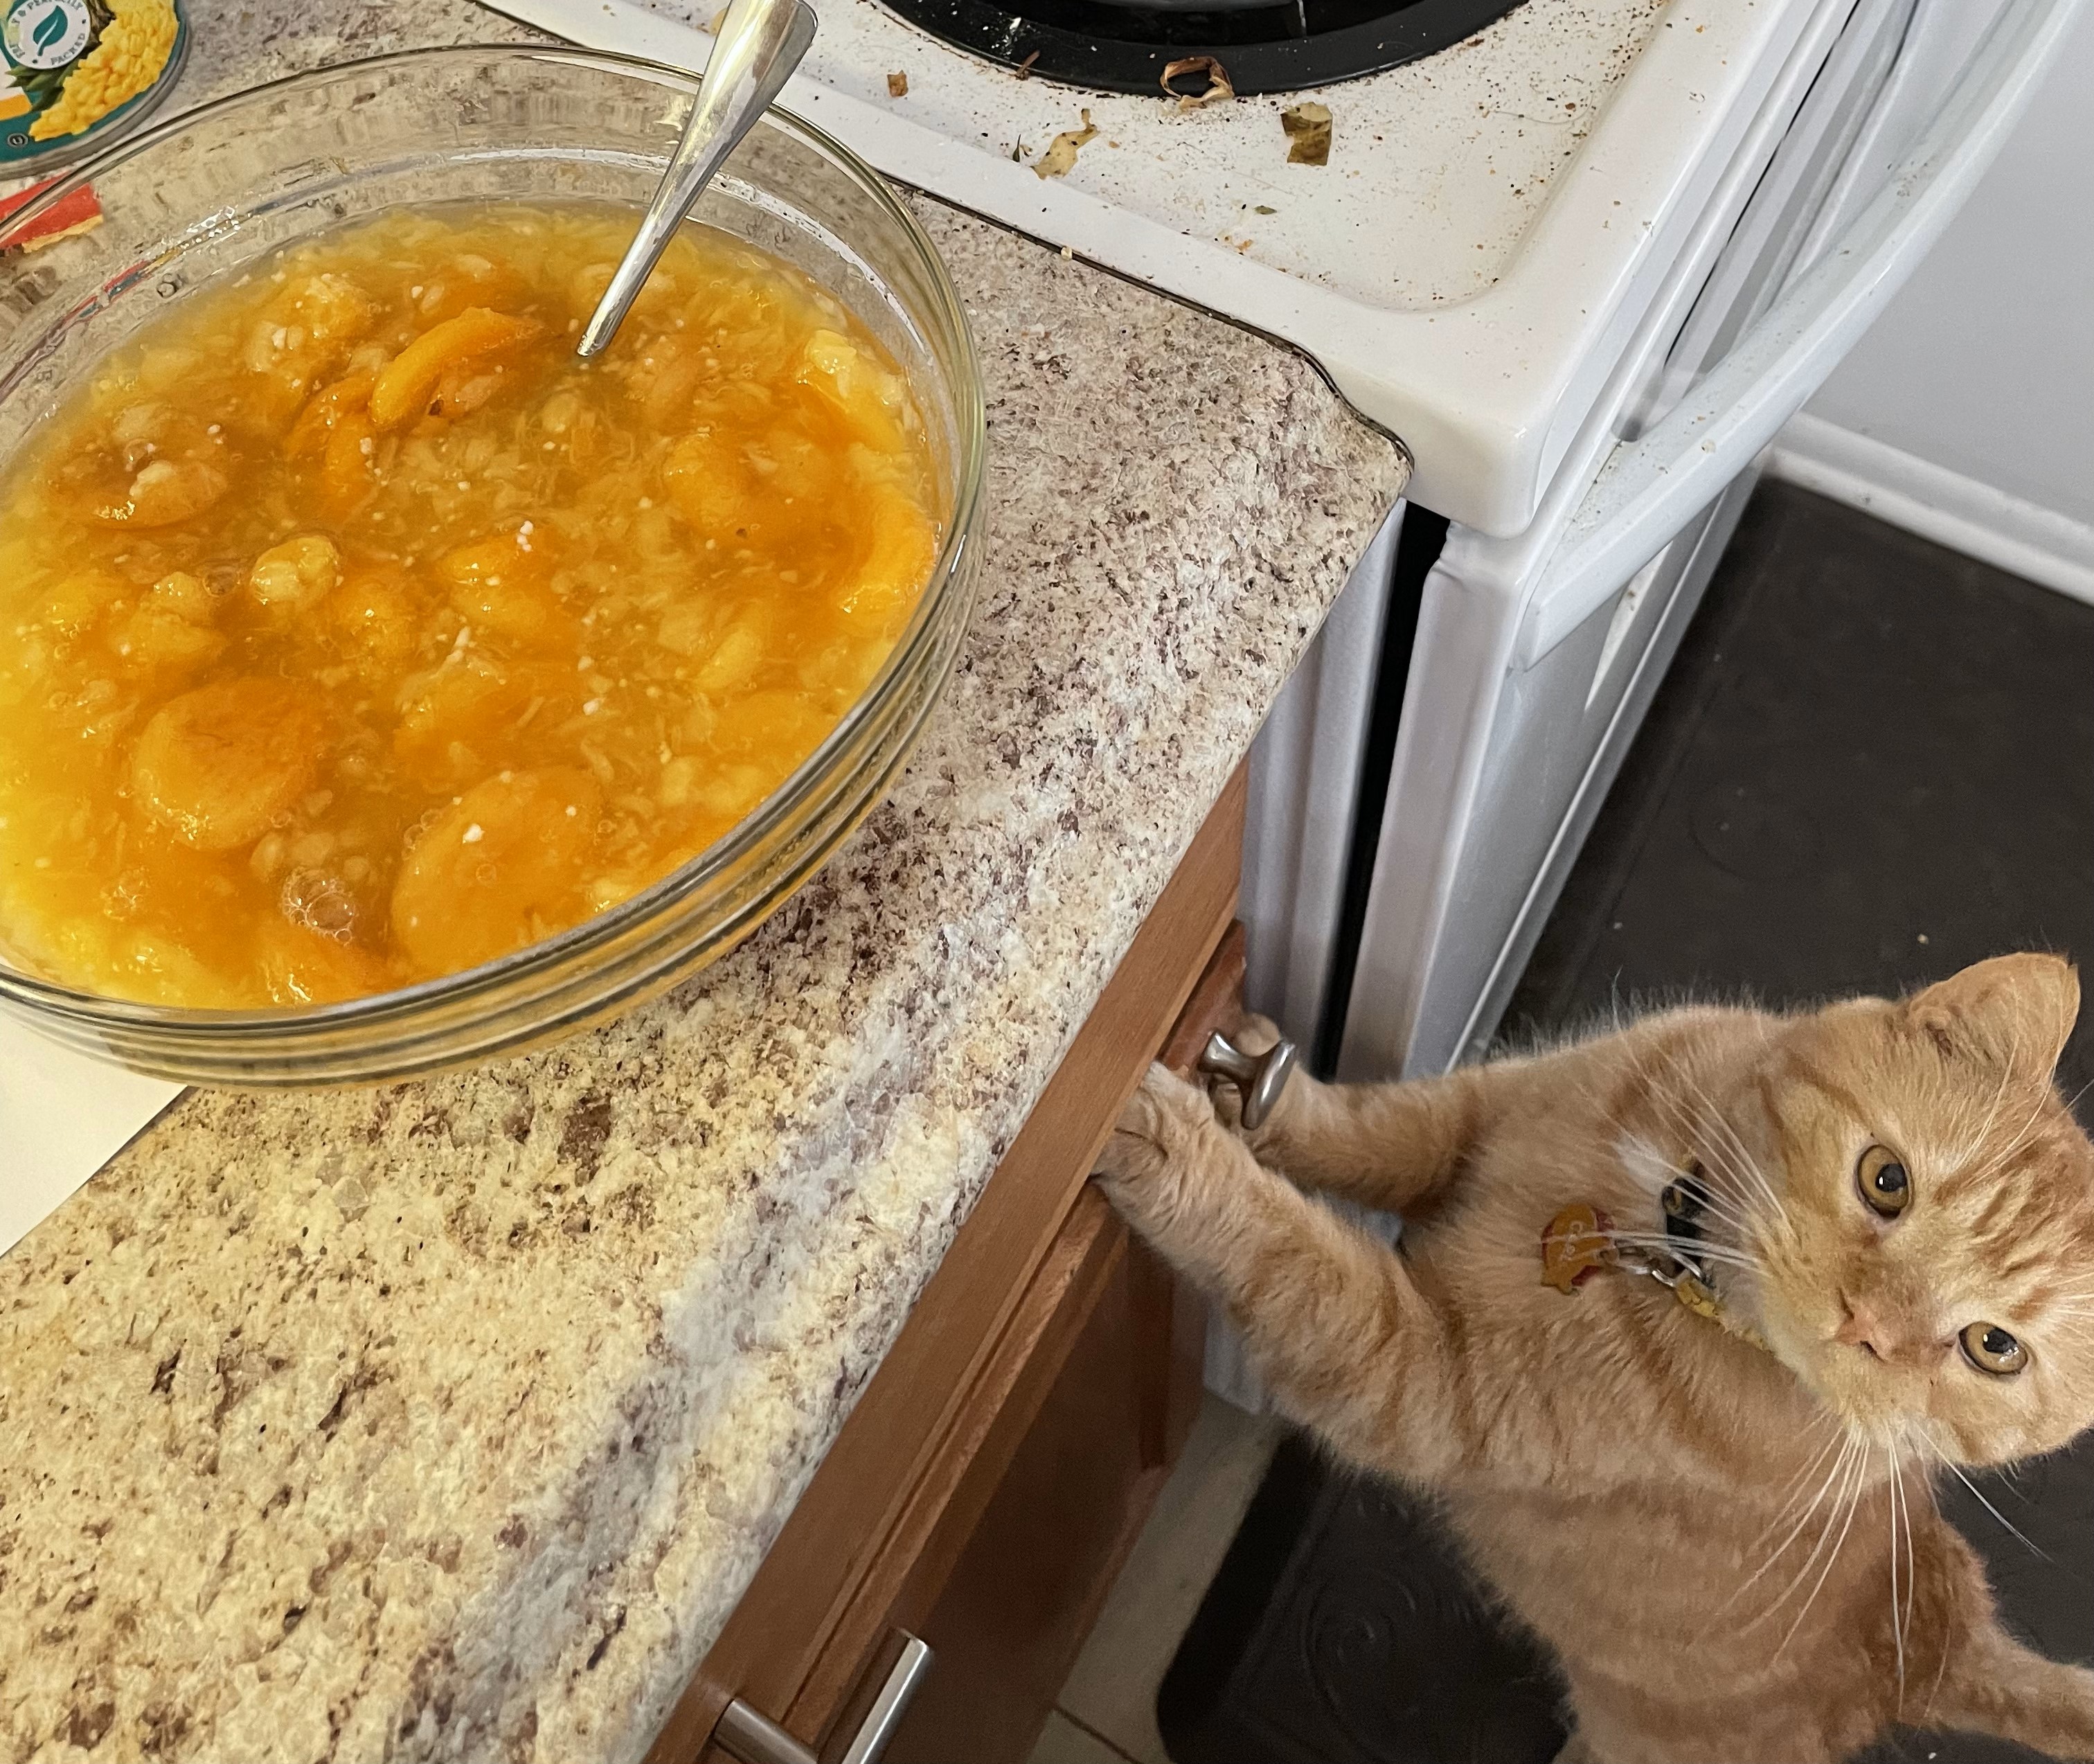 A cat reaching up towards a bowl of pie filling